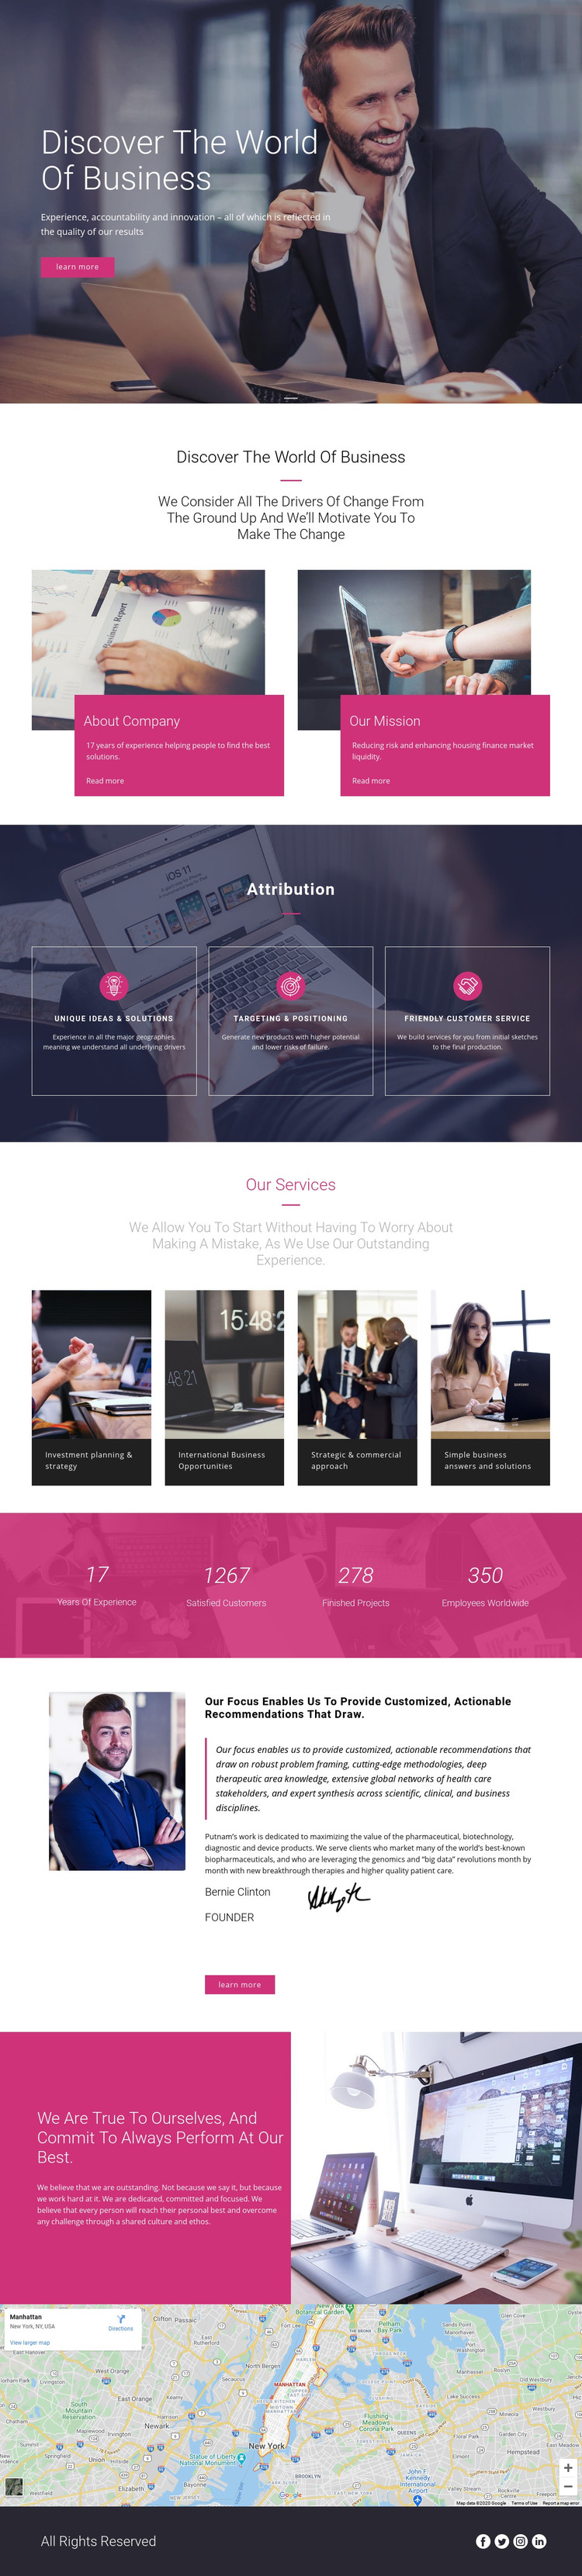 The largest management consultancy Homepage Design